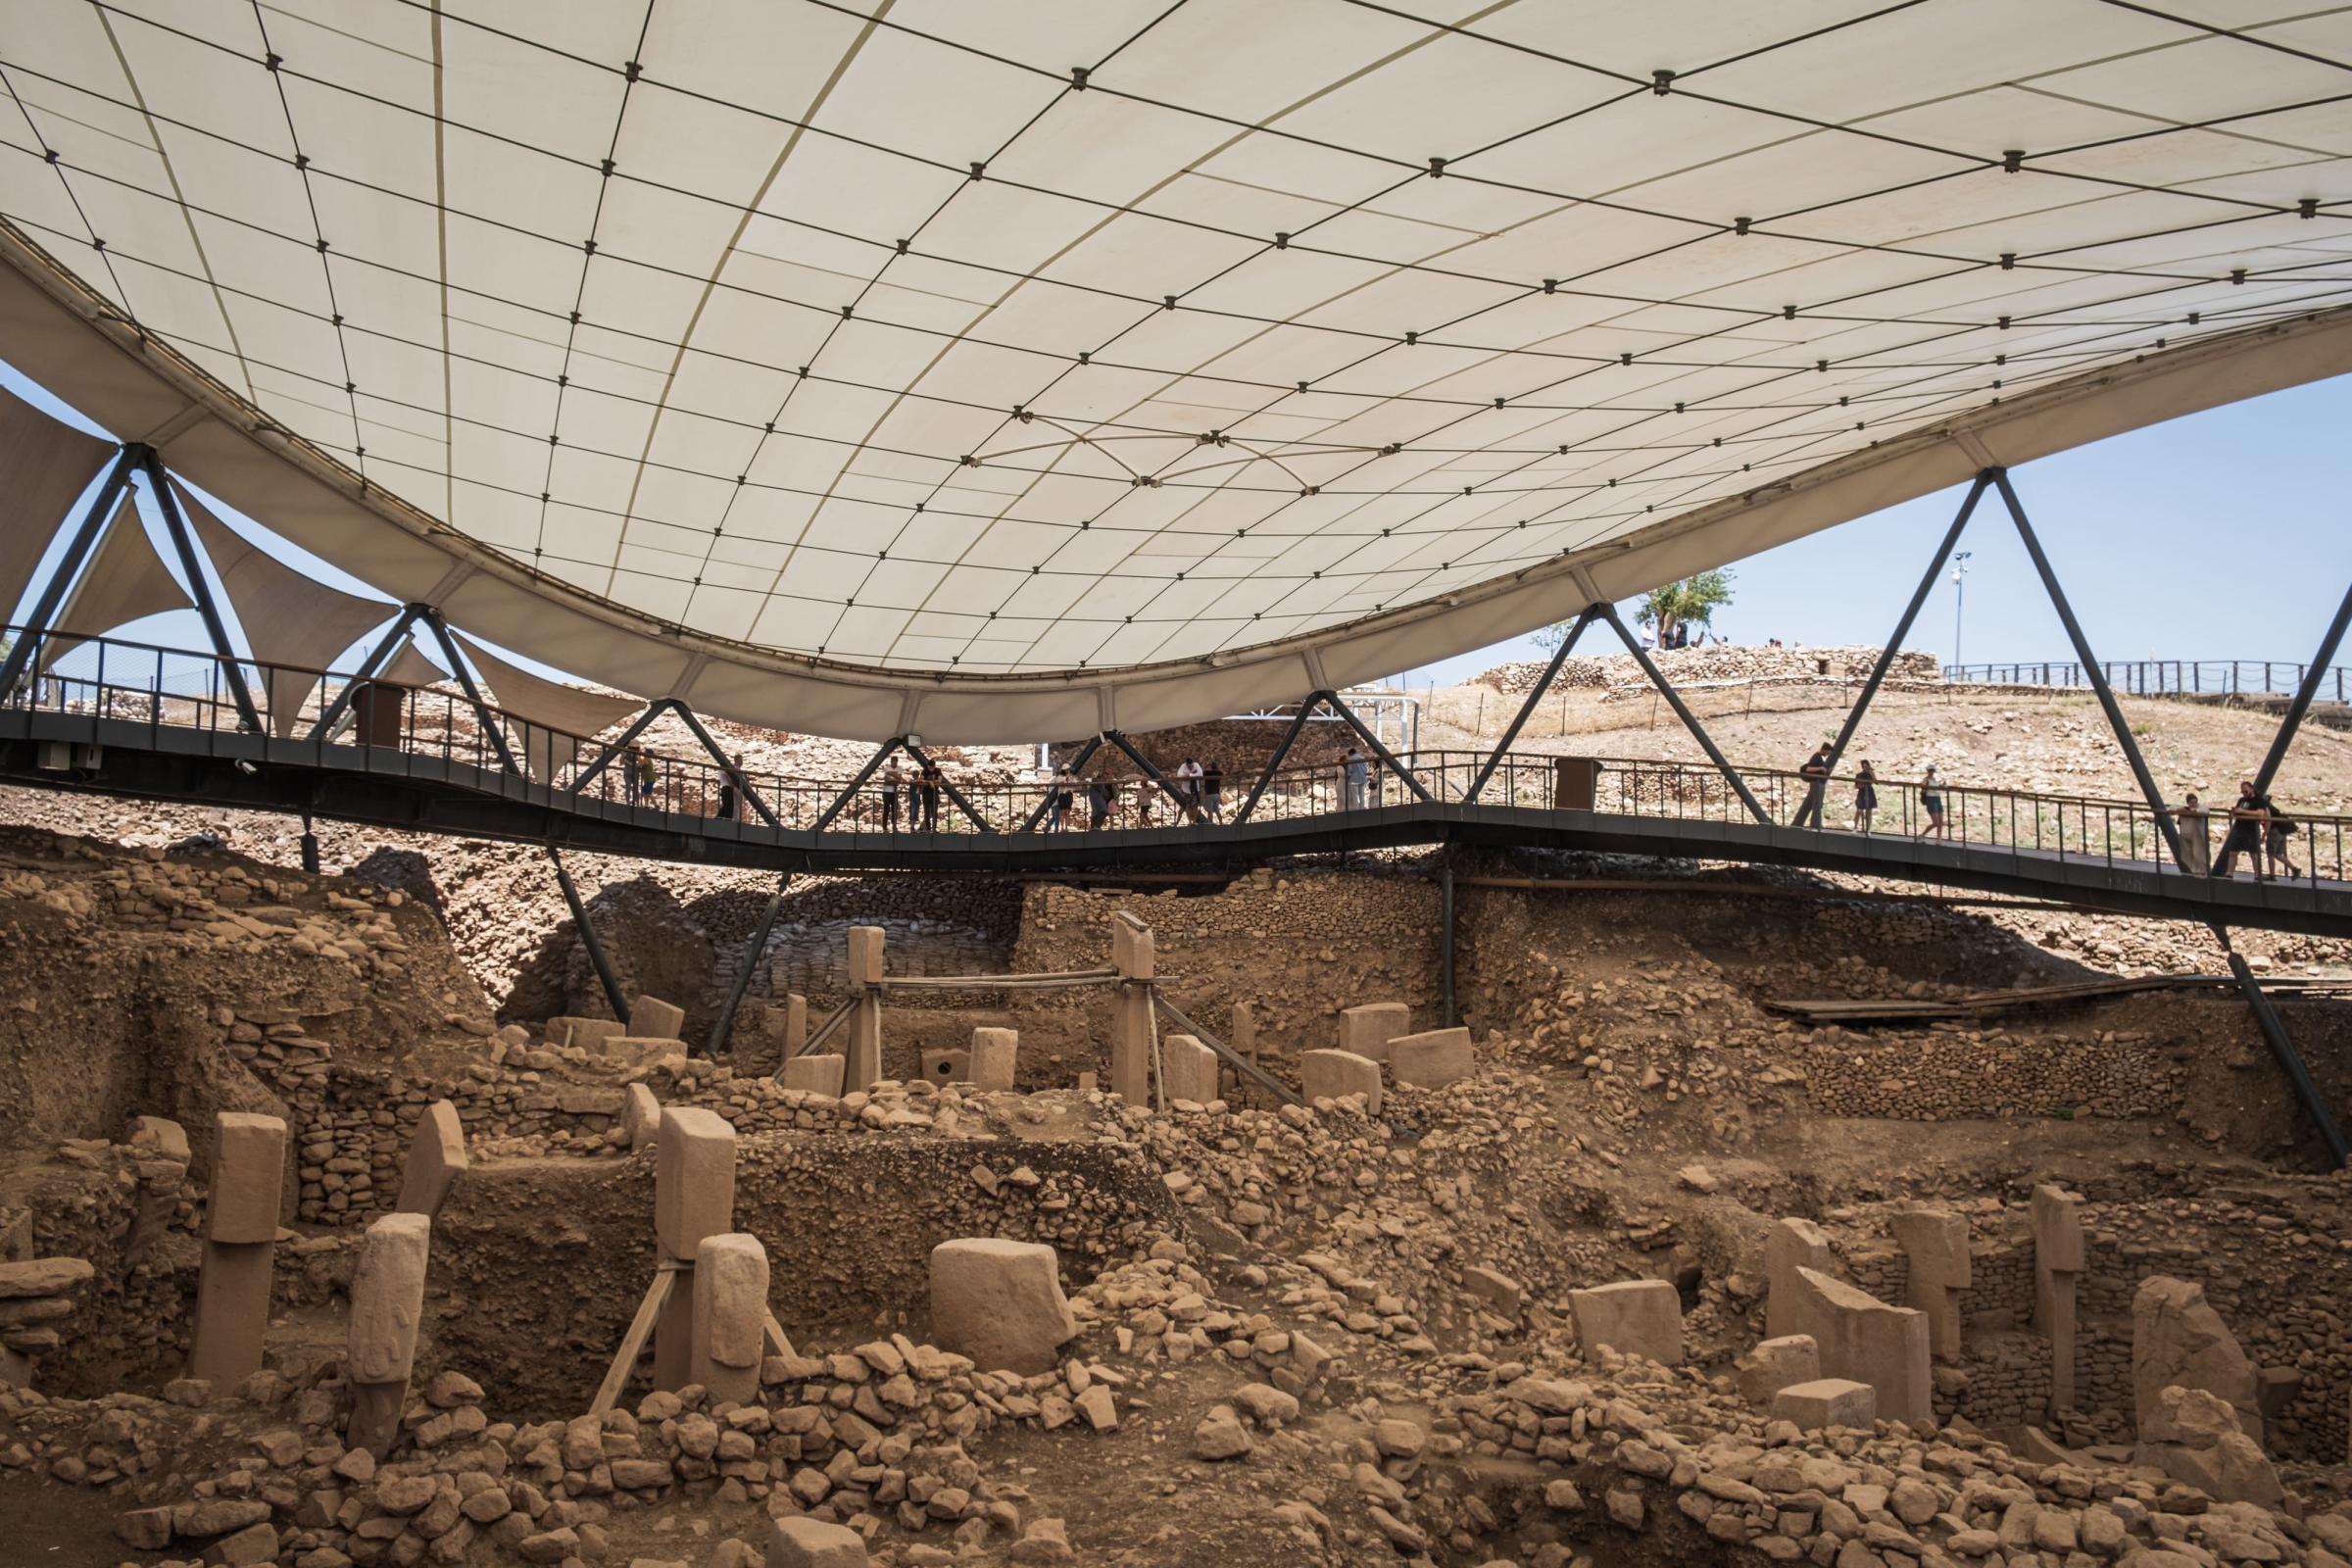 Göbekli Tepe, the first temple in the history of humanity